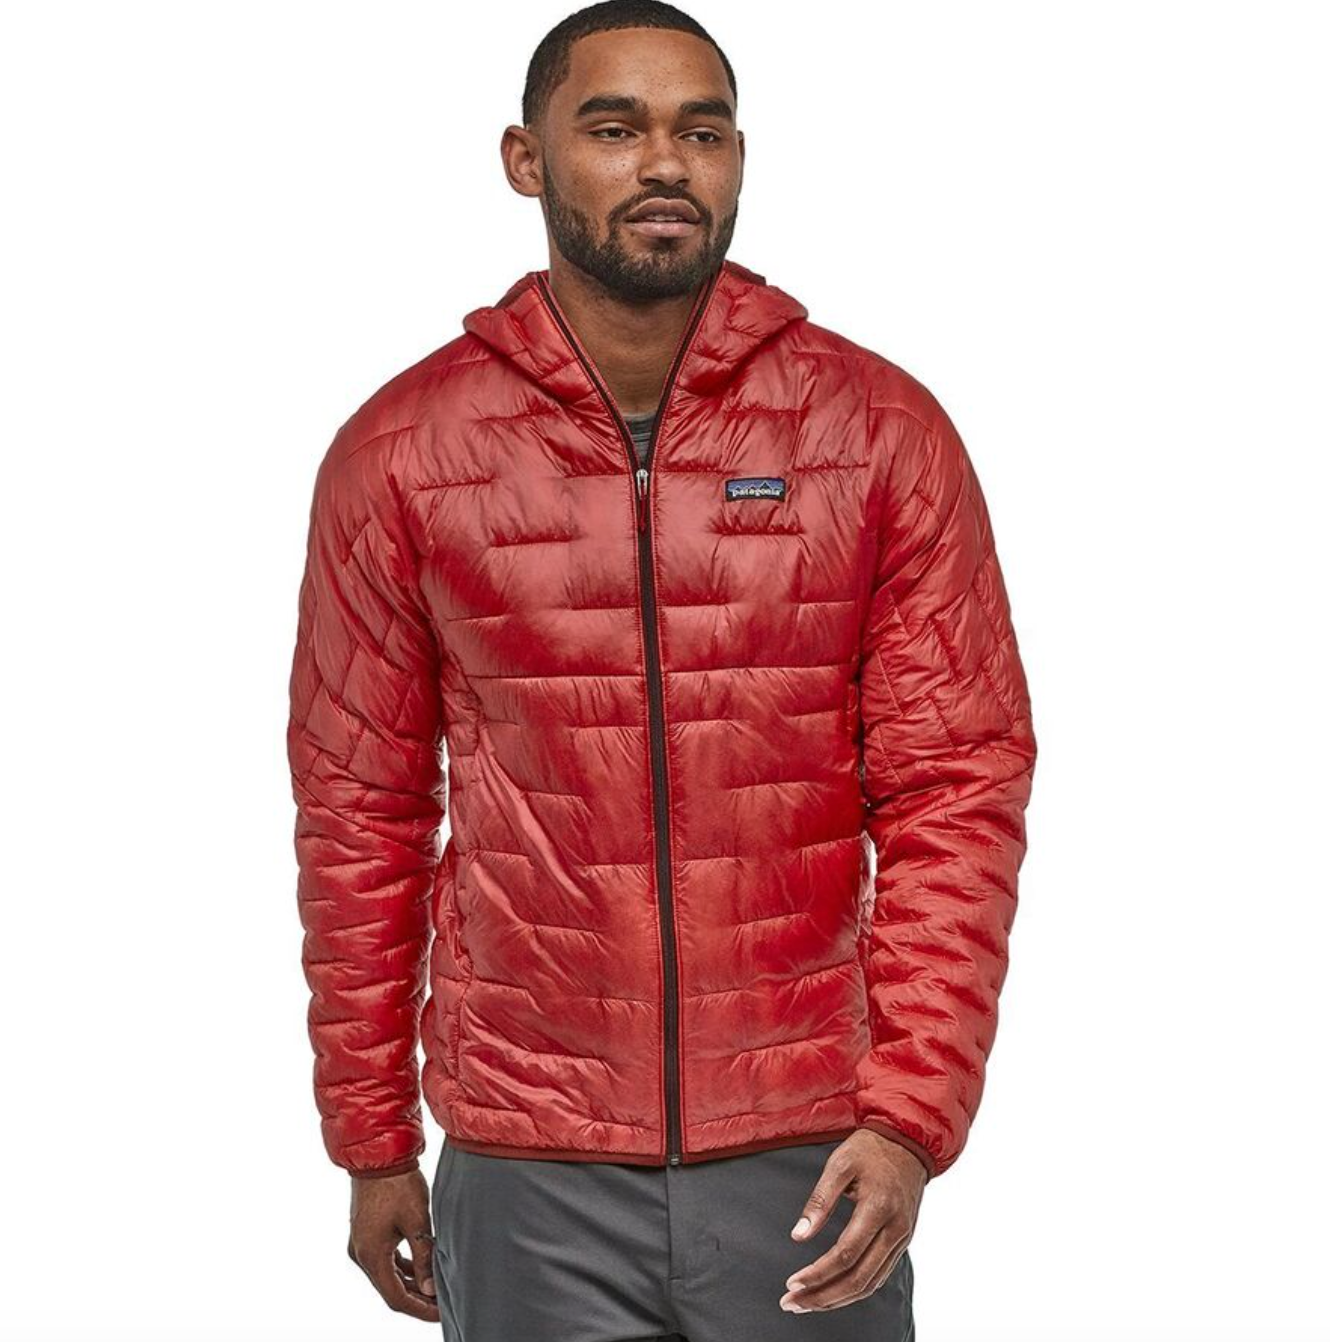 PatagoniaMicro Puff Hooded Insulated Jacke